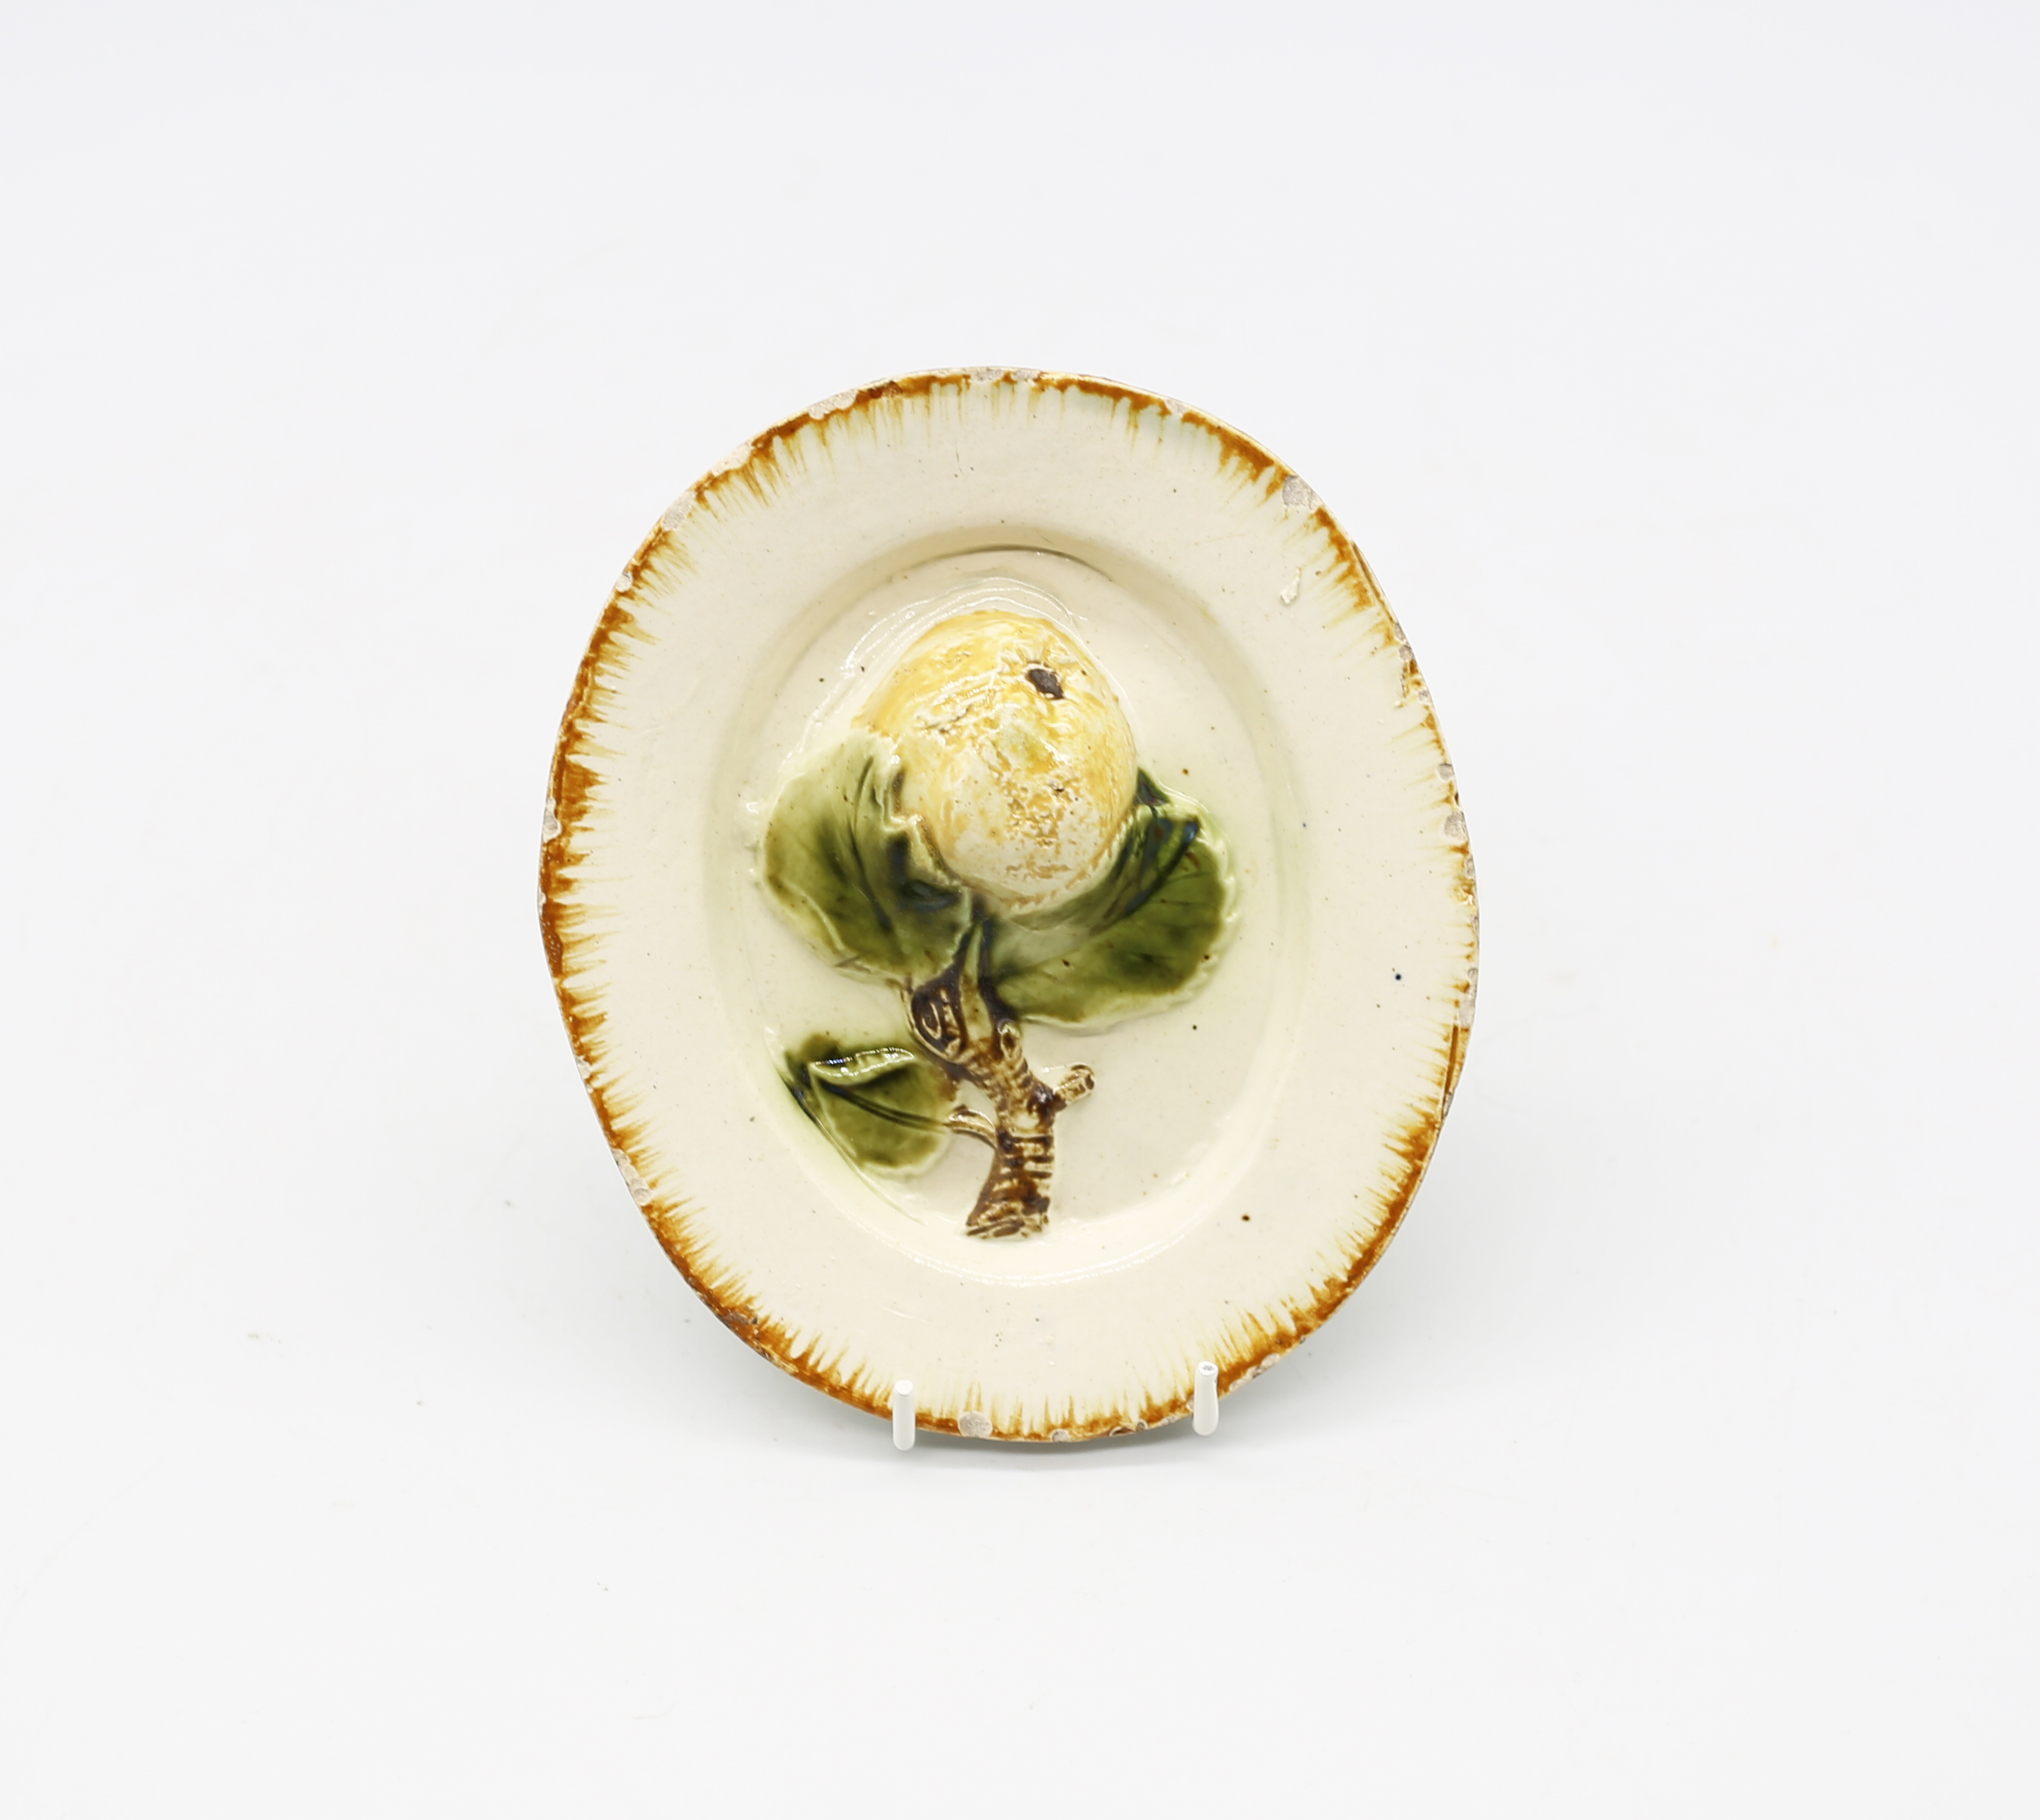 A creamware ‘Toy’ oval platter with an apple and foliage moulded in the centre, with an ochre